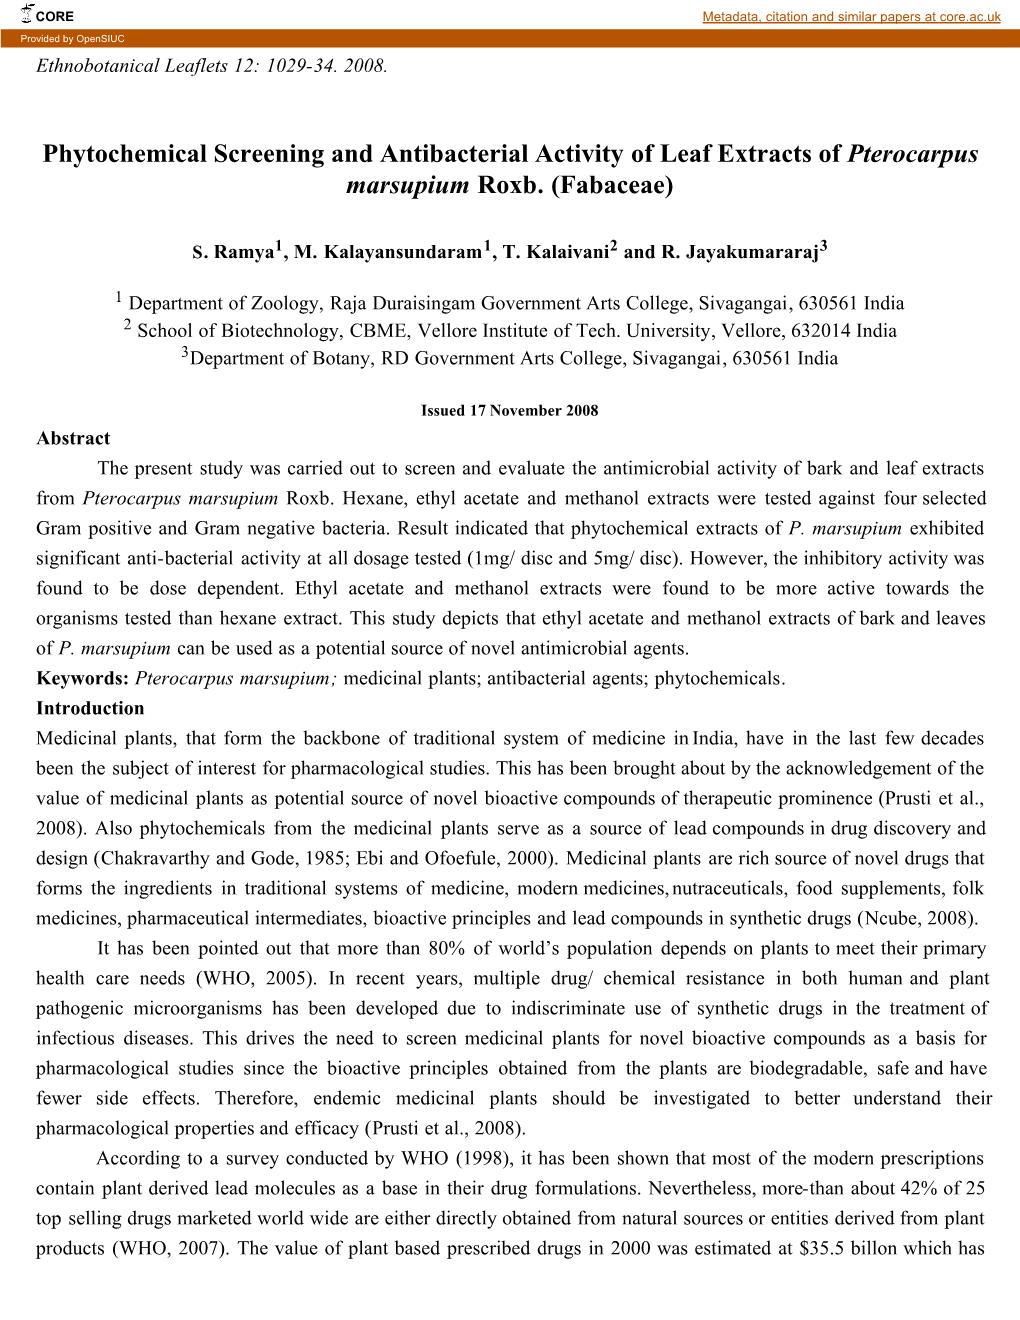 Phytochemical Screening and Antibacterial Activity of Leaf Extracts of Pterocarpus Marsupium Roxb